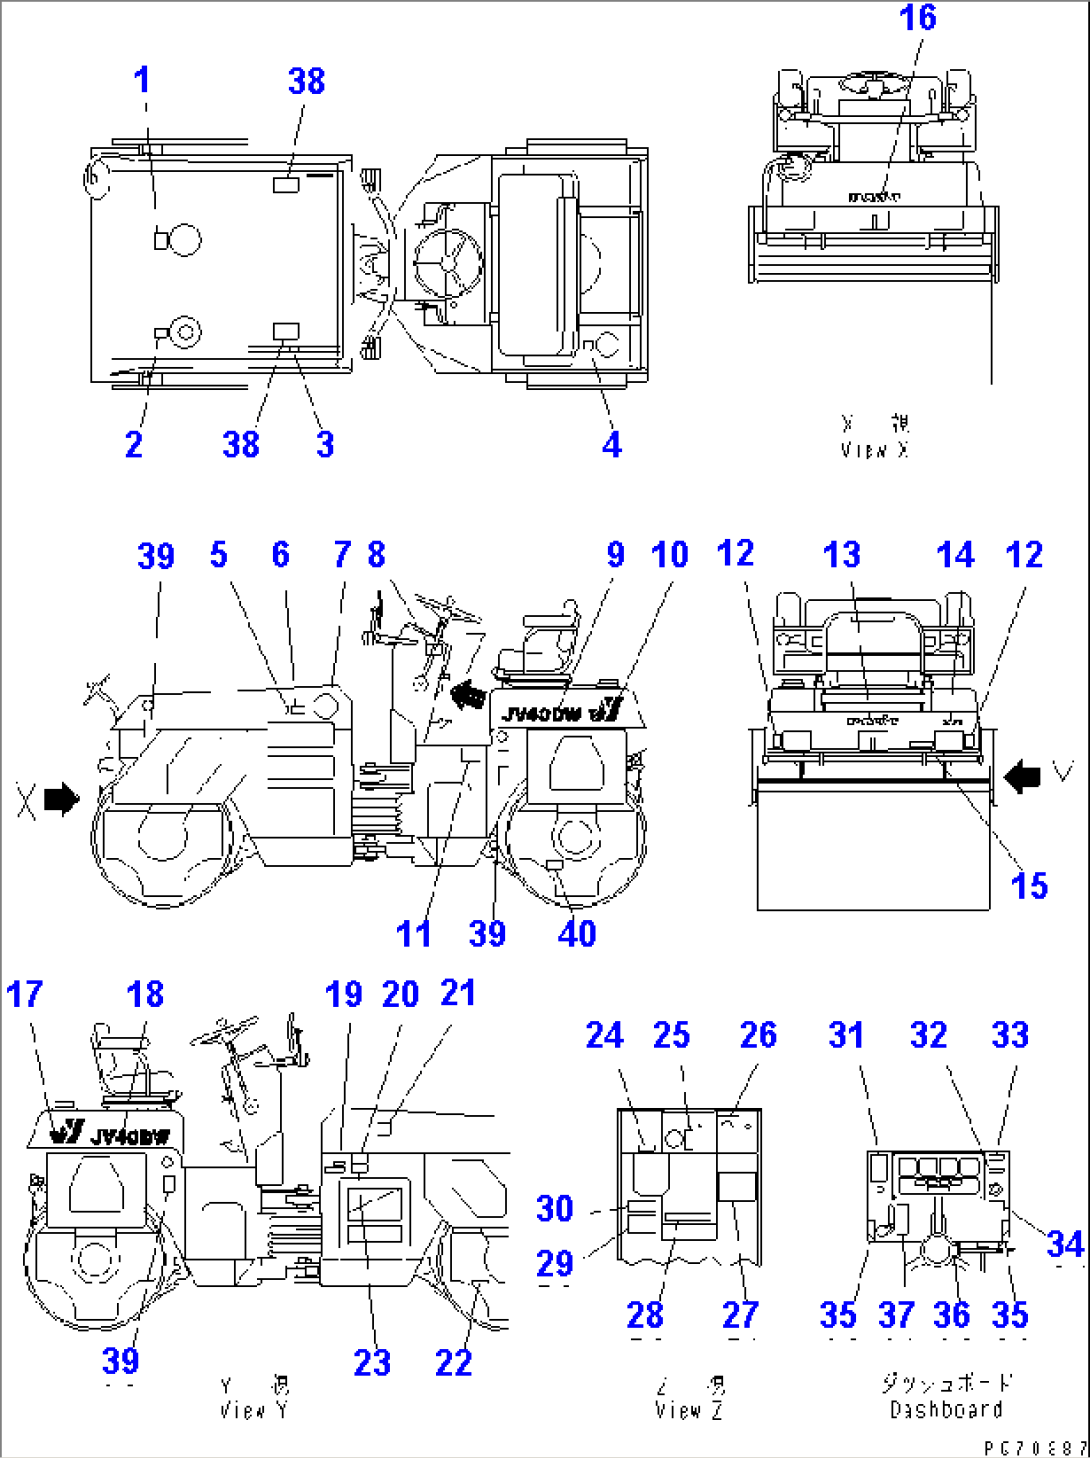 MARKS AND PLATES (JAPANESE)(#5001-5100)